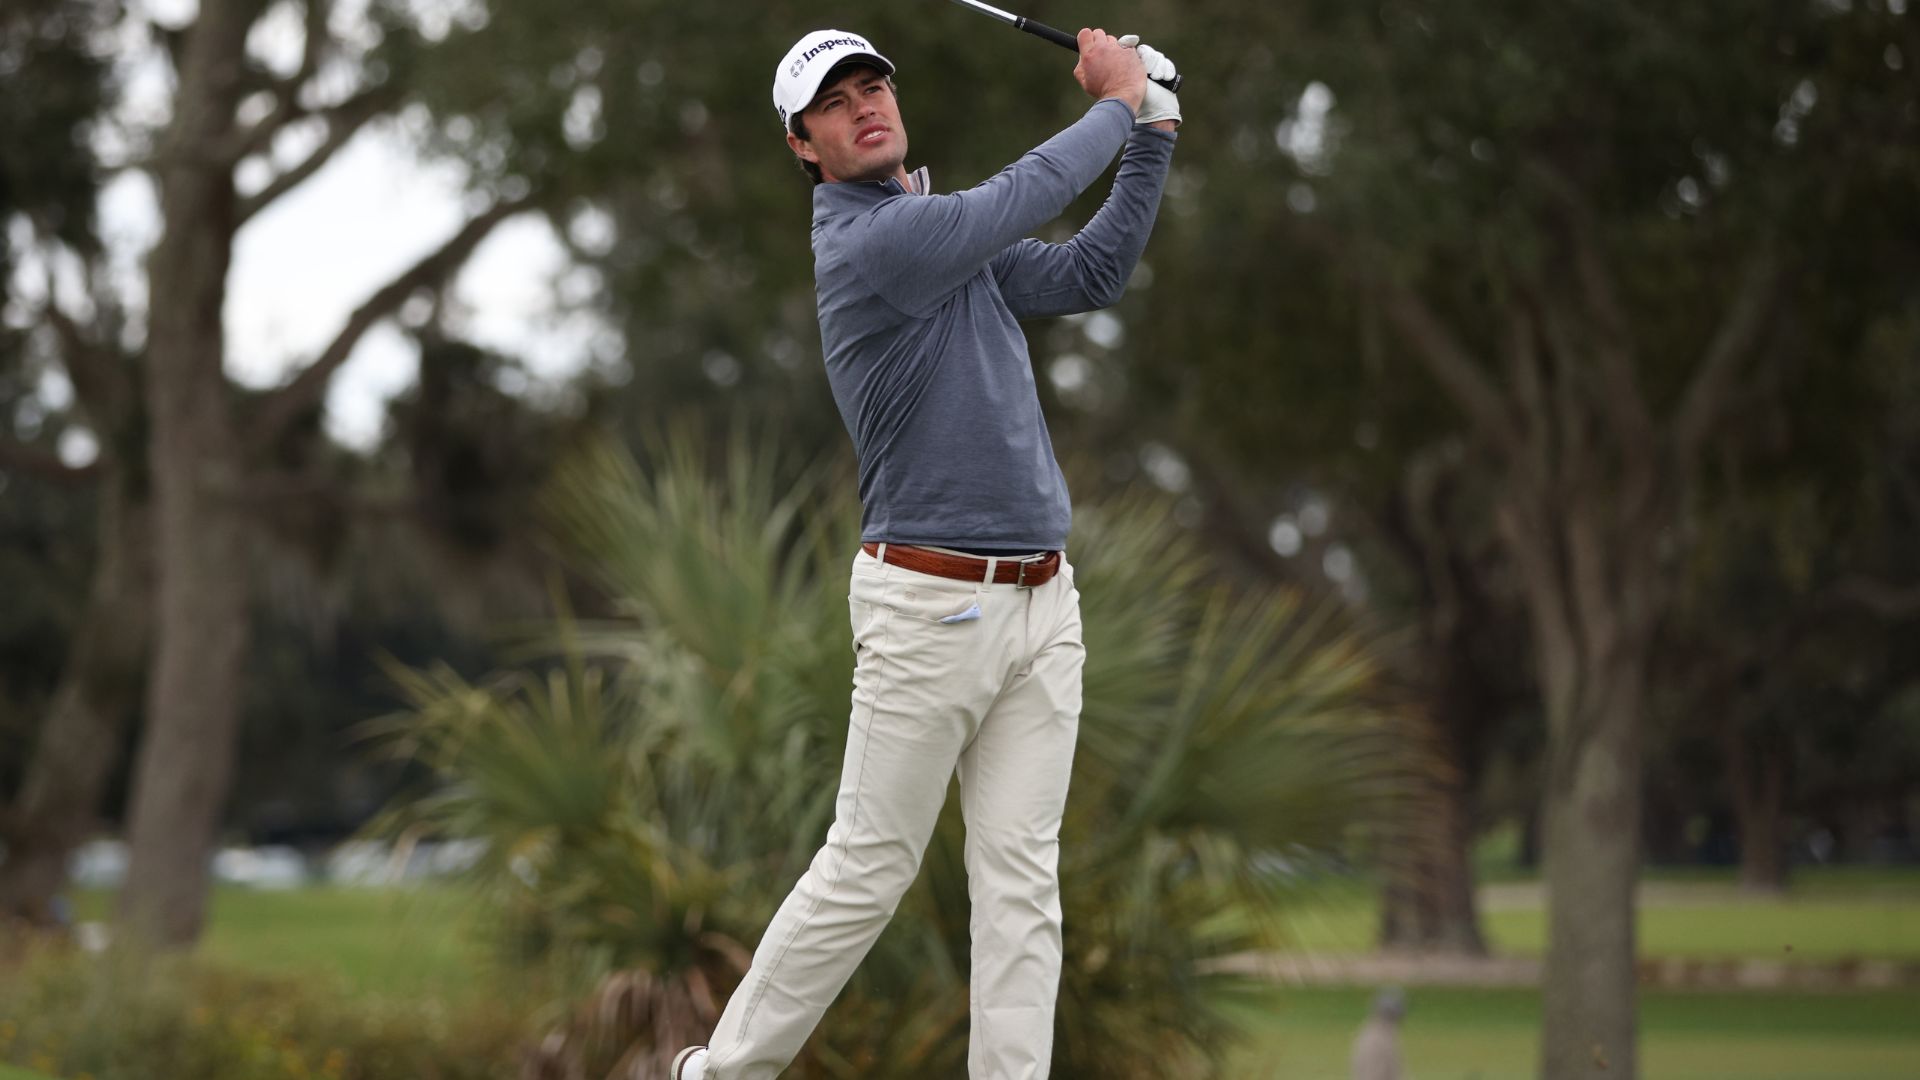 Cole Hammer gets into Sony Open with closing 65, first Tour top-10 at RSM Classic